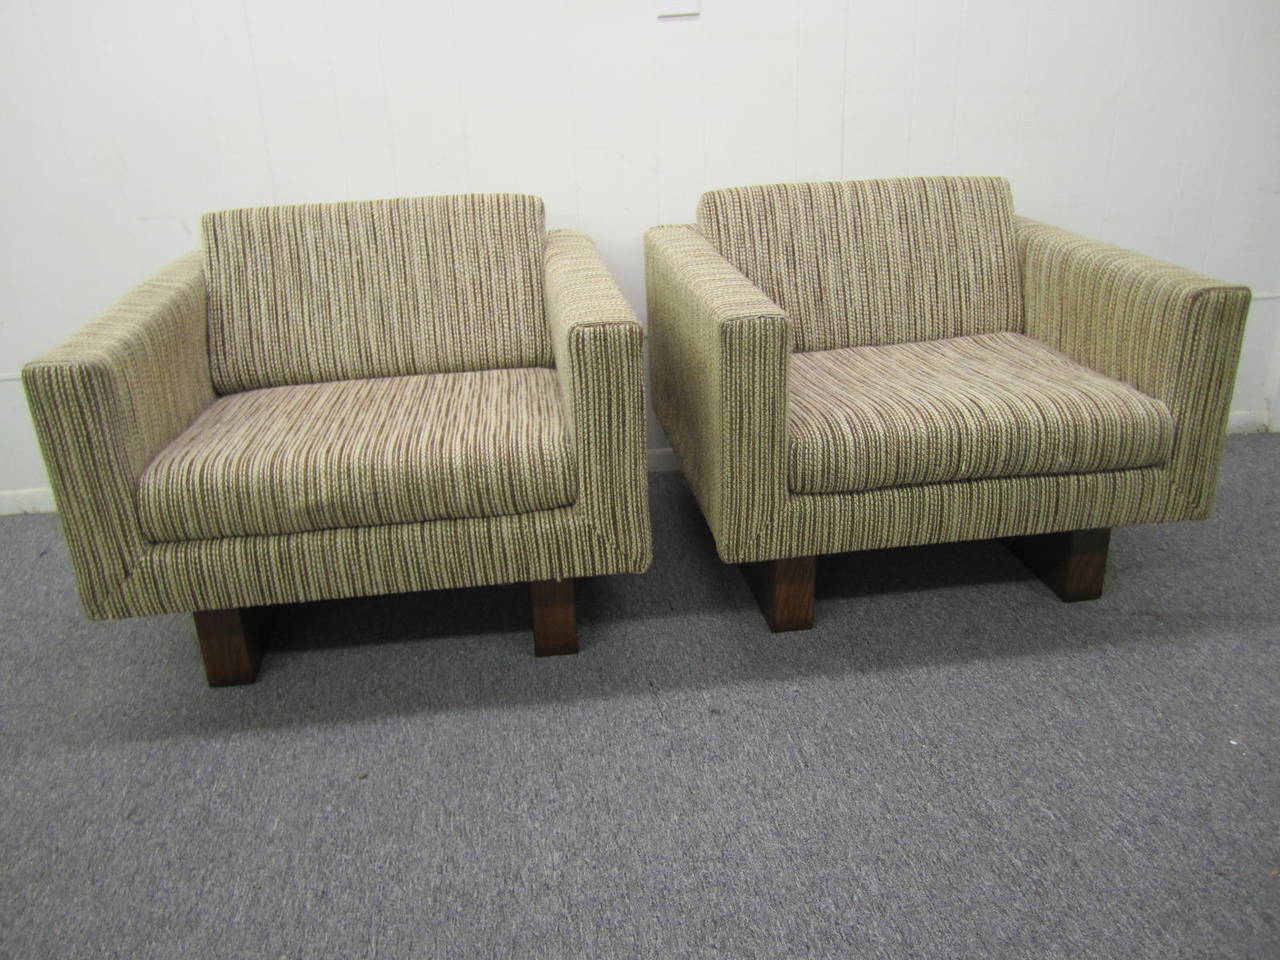 Outstanding and rare signed Harvey Probber pair of cube lounge chairs. This unusual pair rests on two chunky walnut legs that extend up the back-very handsome! These chairs retains their original nubby wool fabric in very nice condition. 